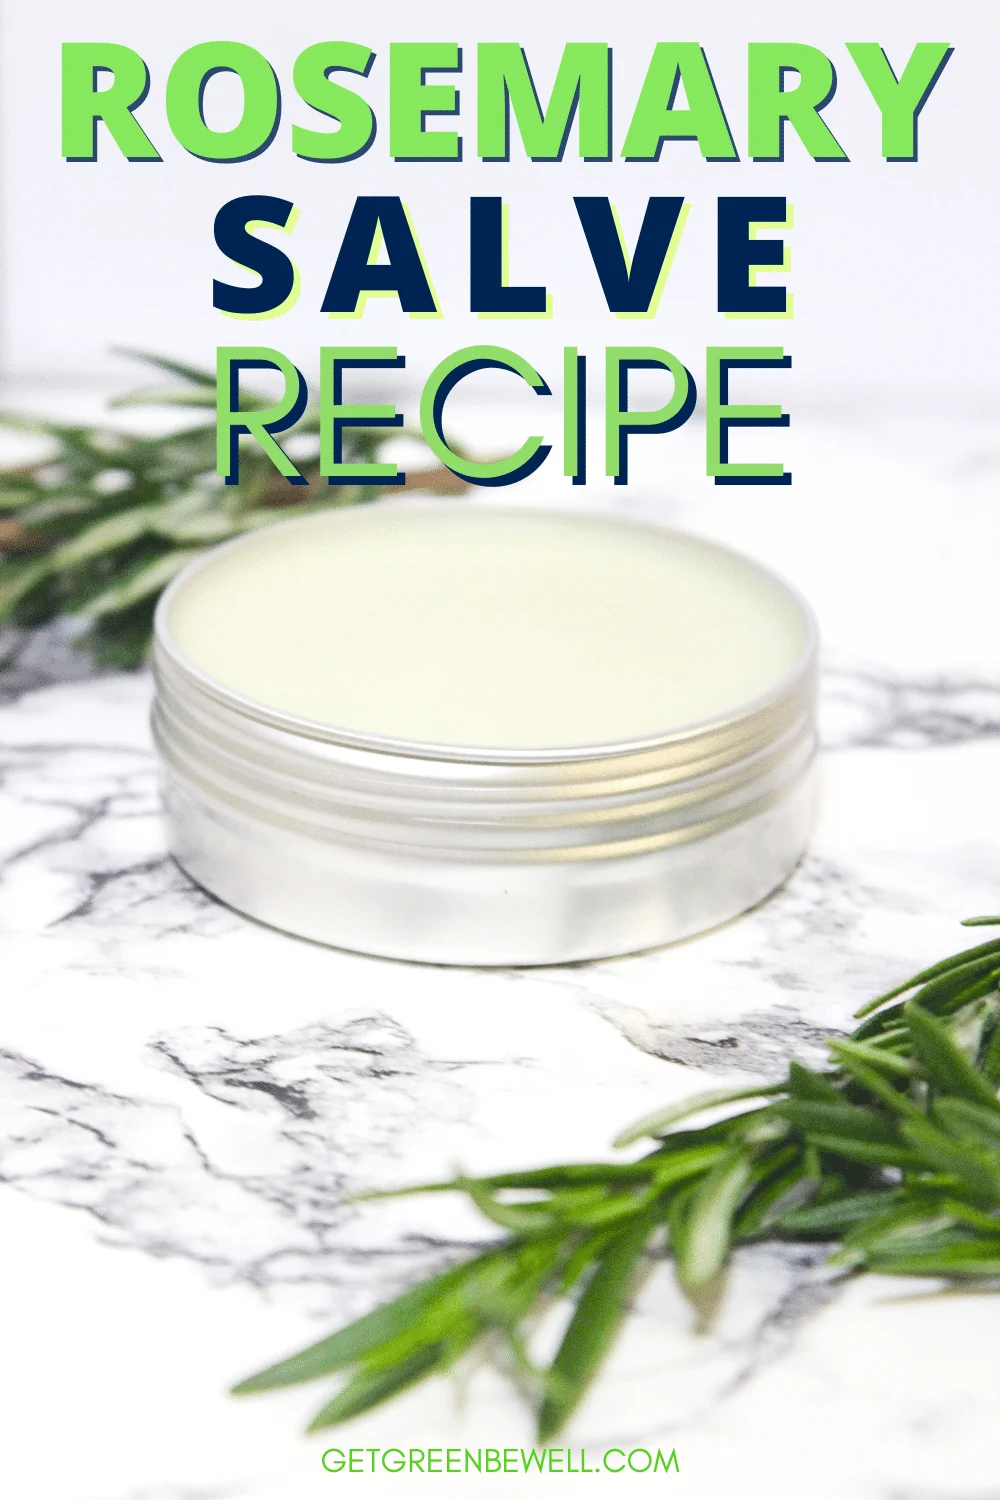 Rosemary salve with sprigs of rosemary.